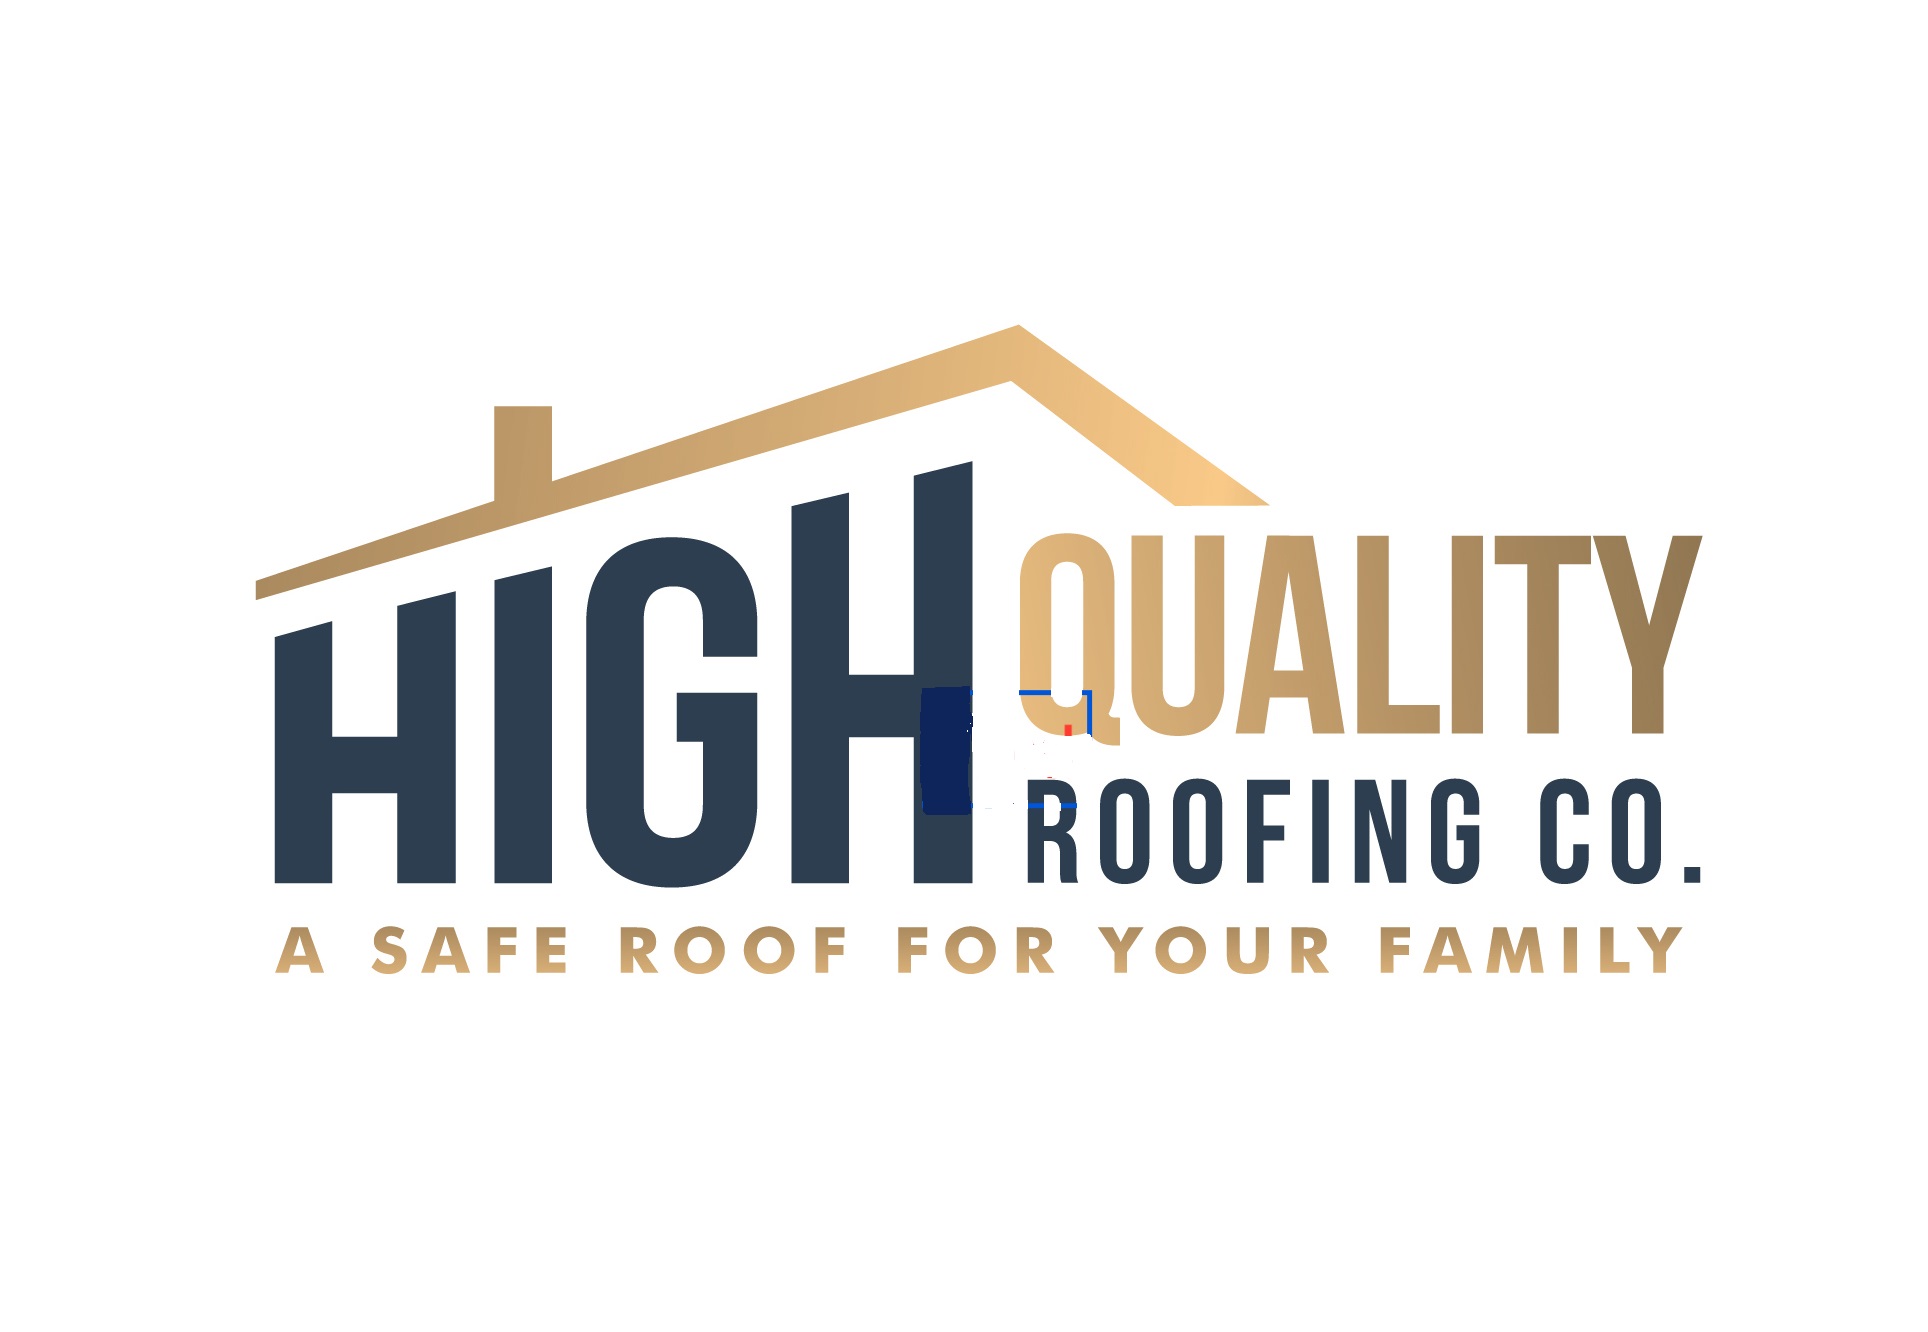 High Quality Roofing Co.